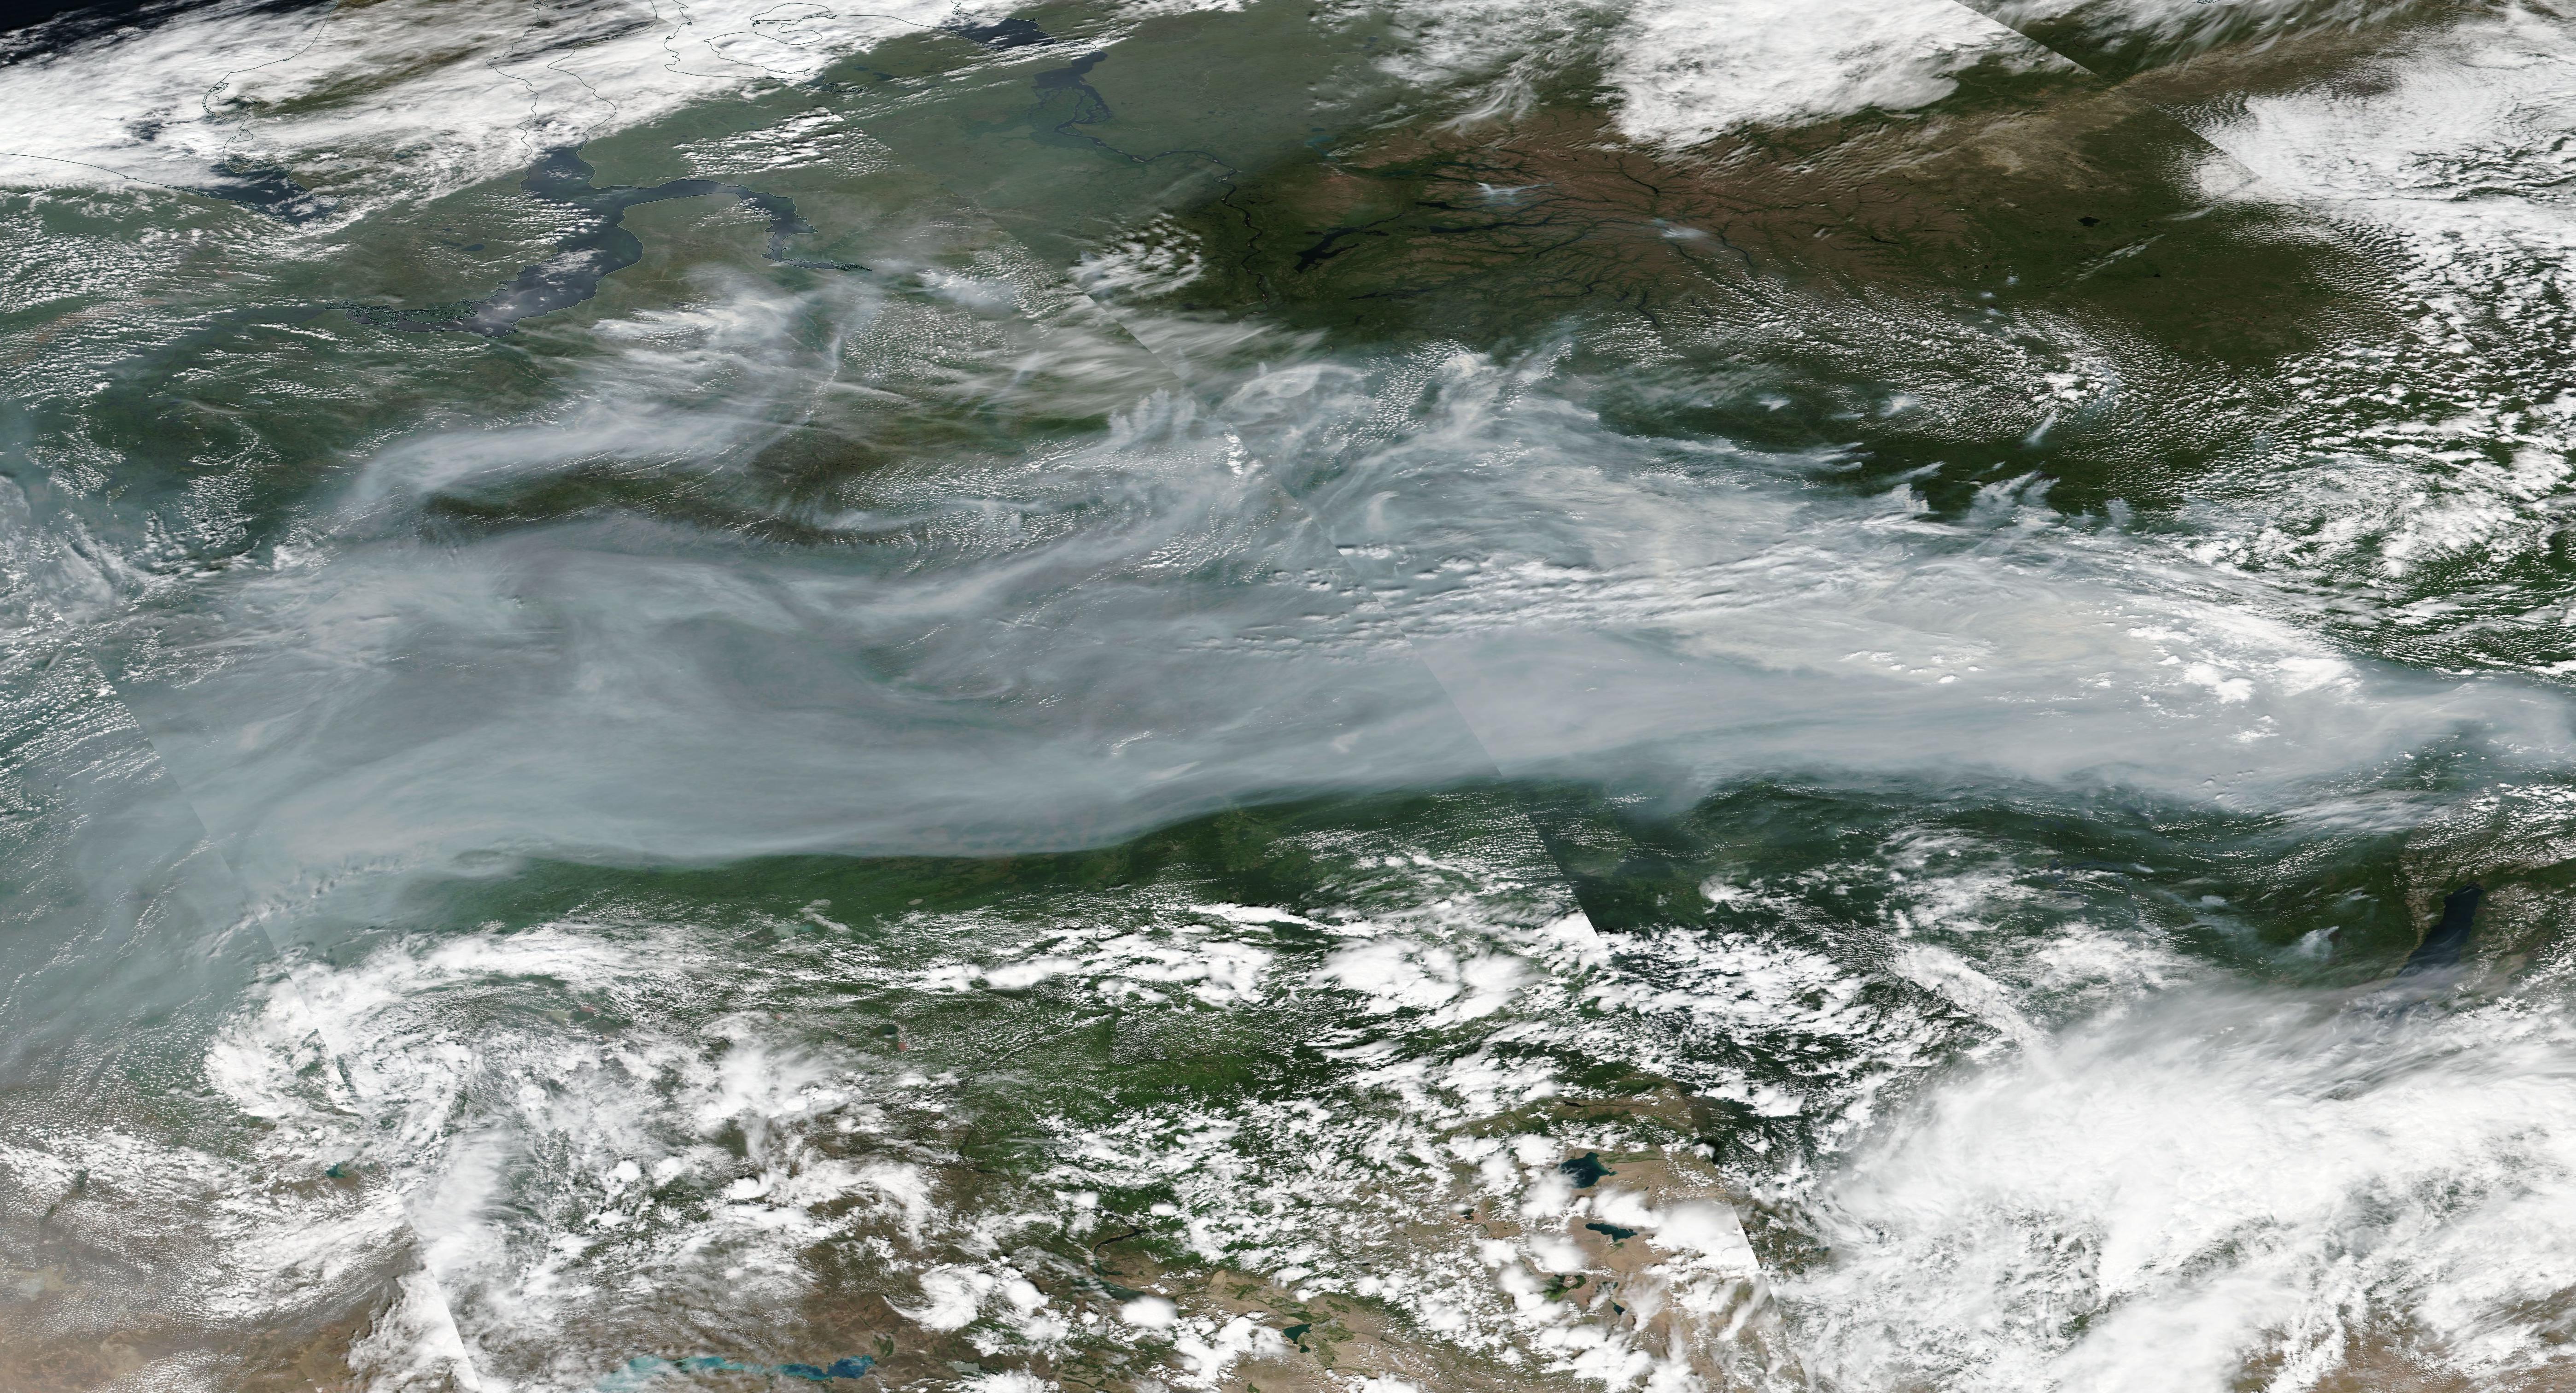 A blanket of smoke from fires in Siberia is so huge it can be seen from nearly 1 million miles away in space